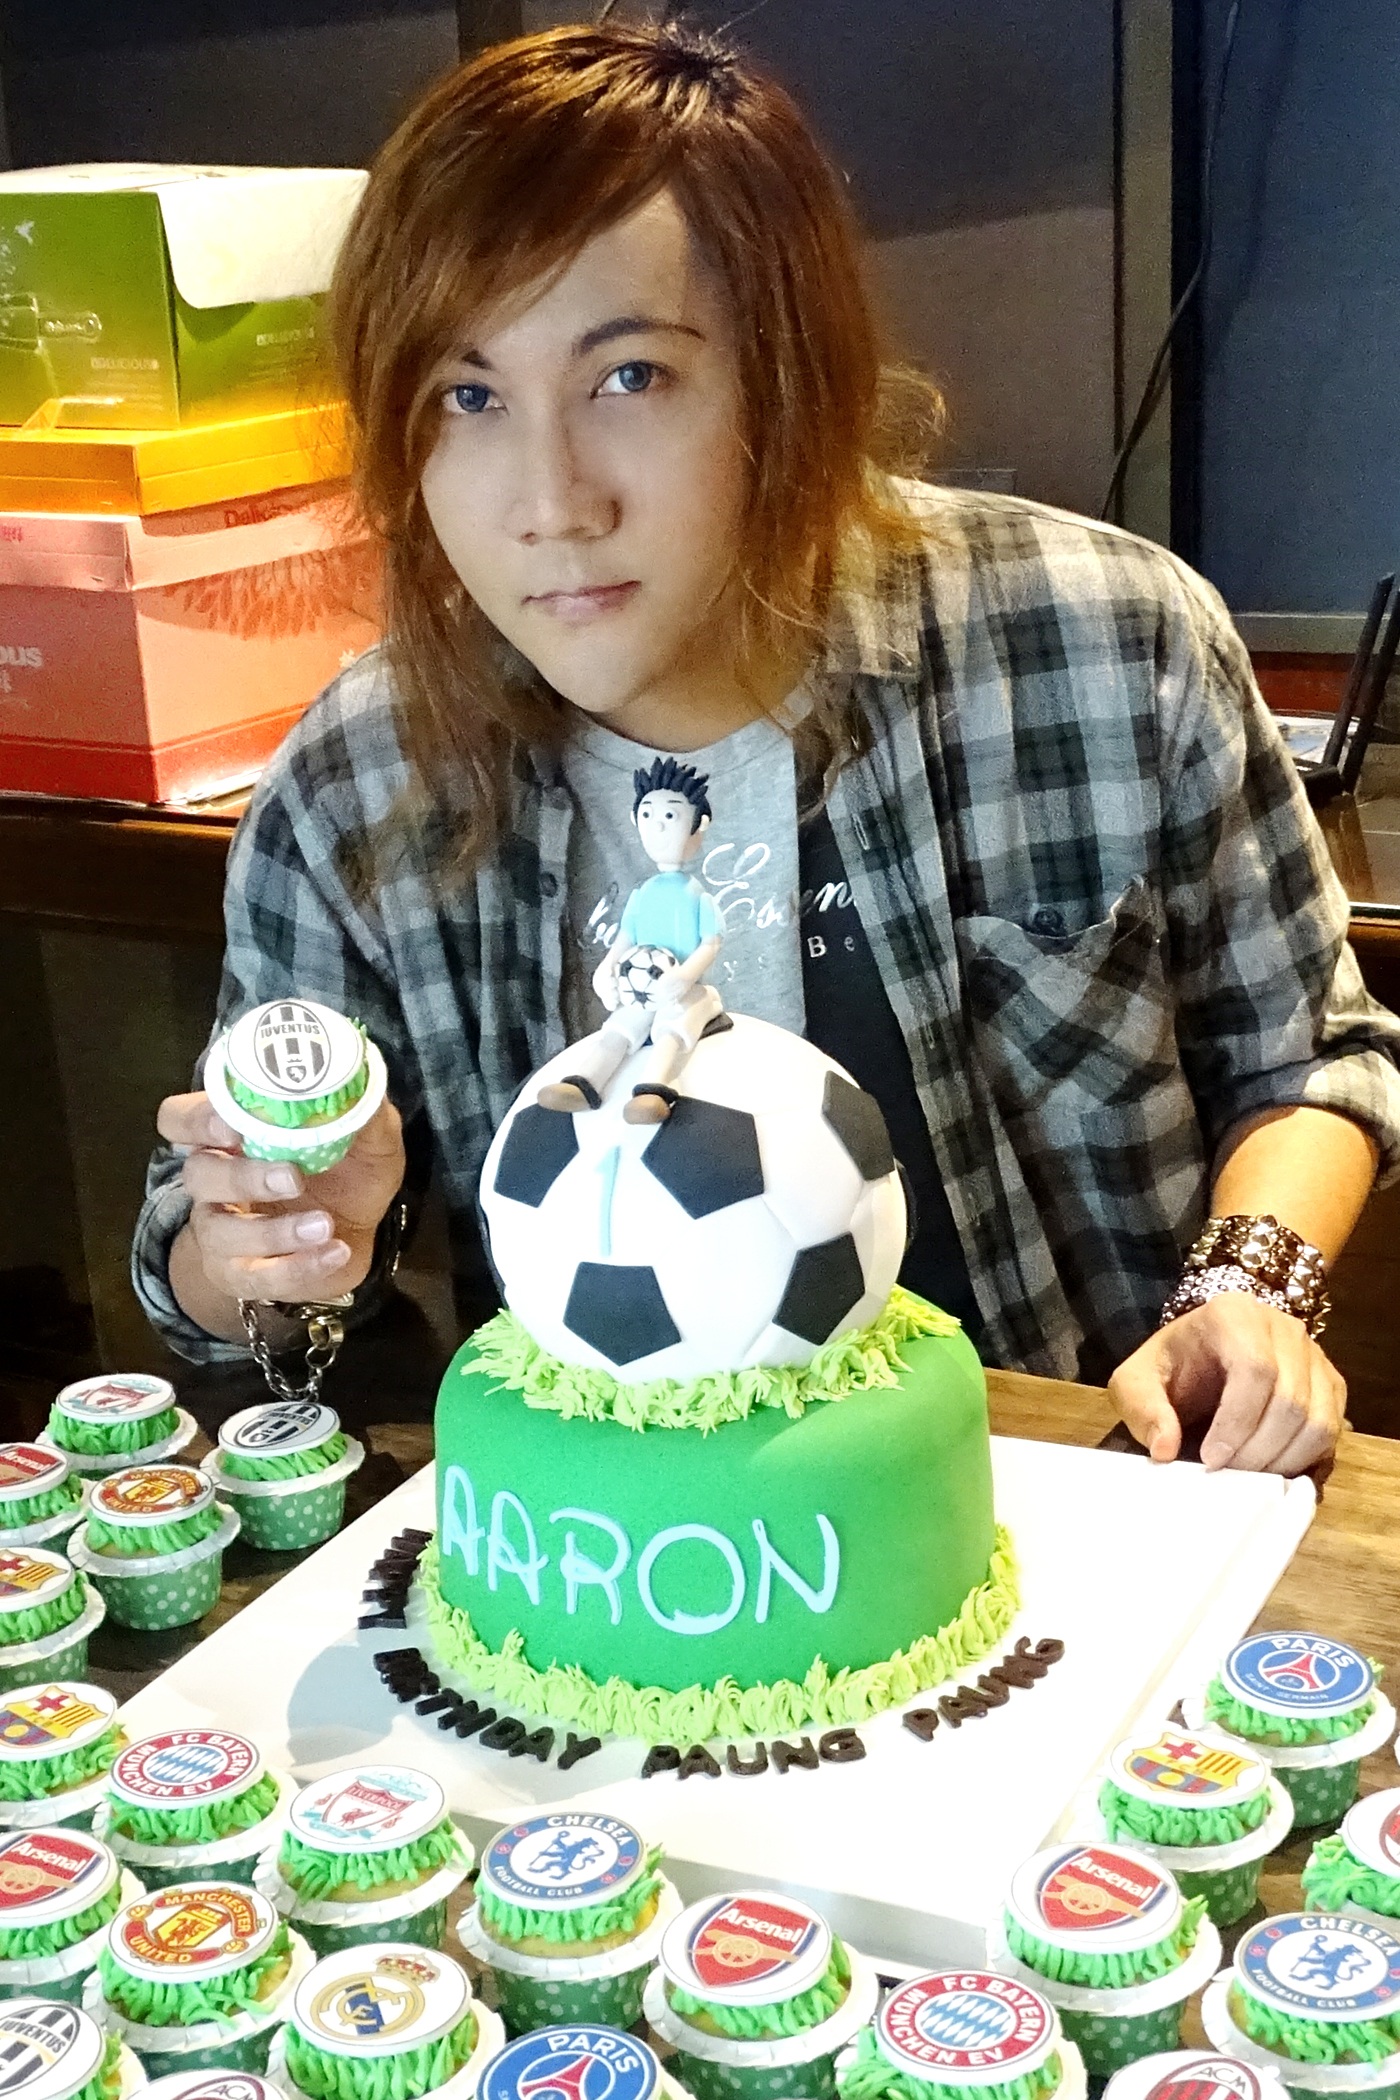 Phyo Han Kyaw with a football-themed cake and cupcake order.